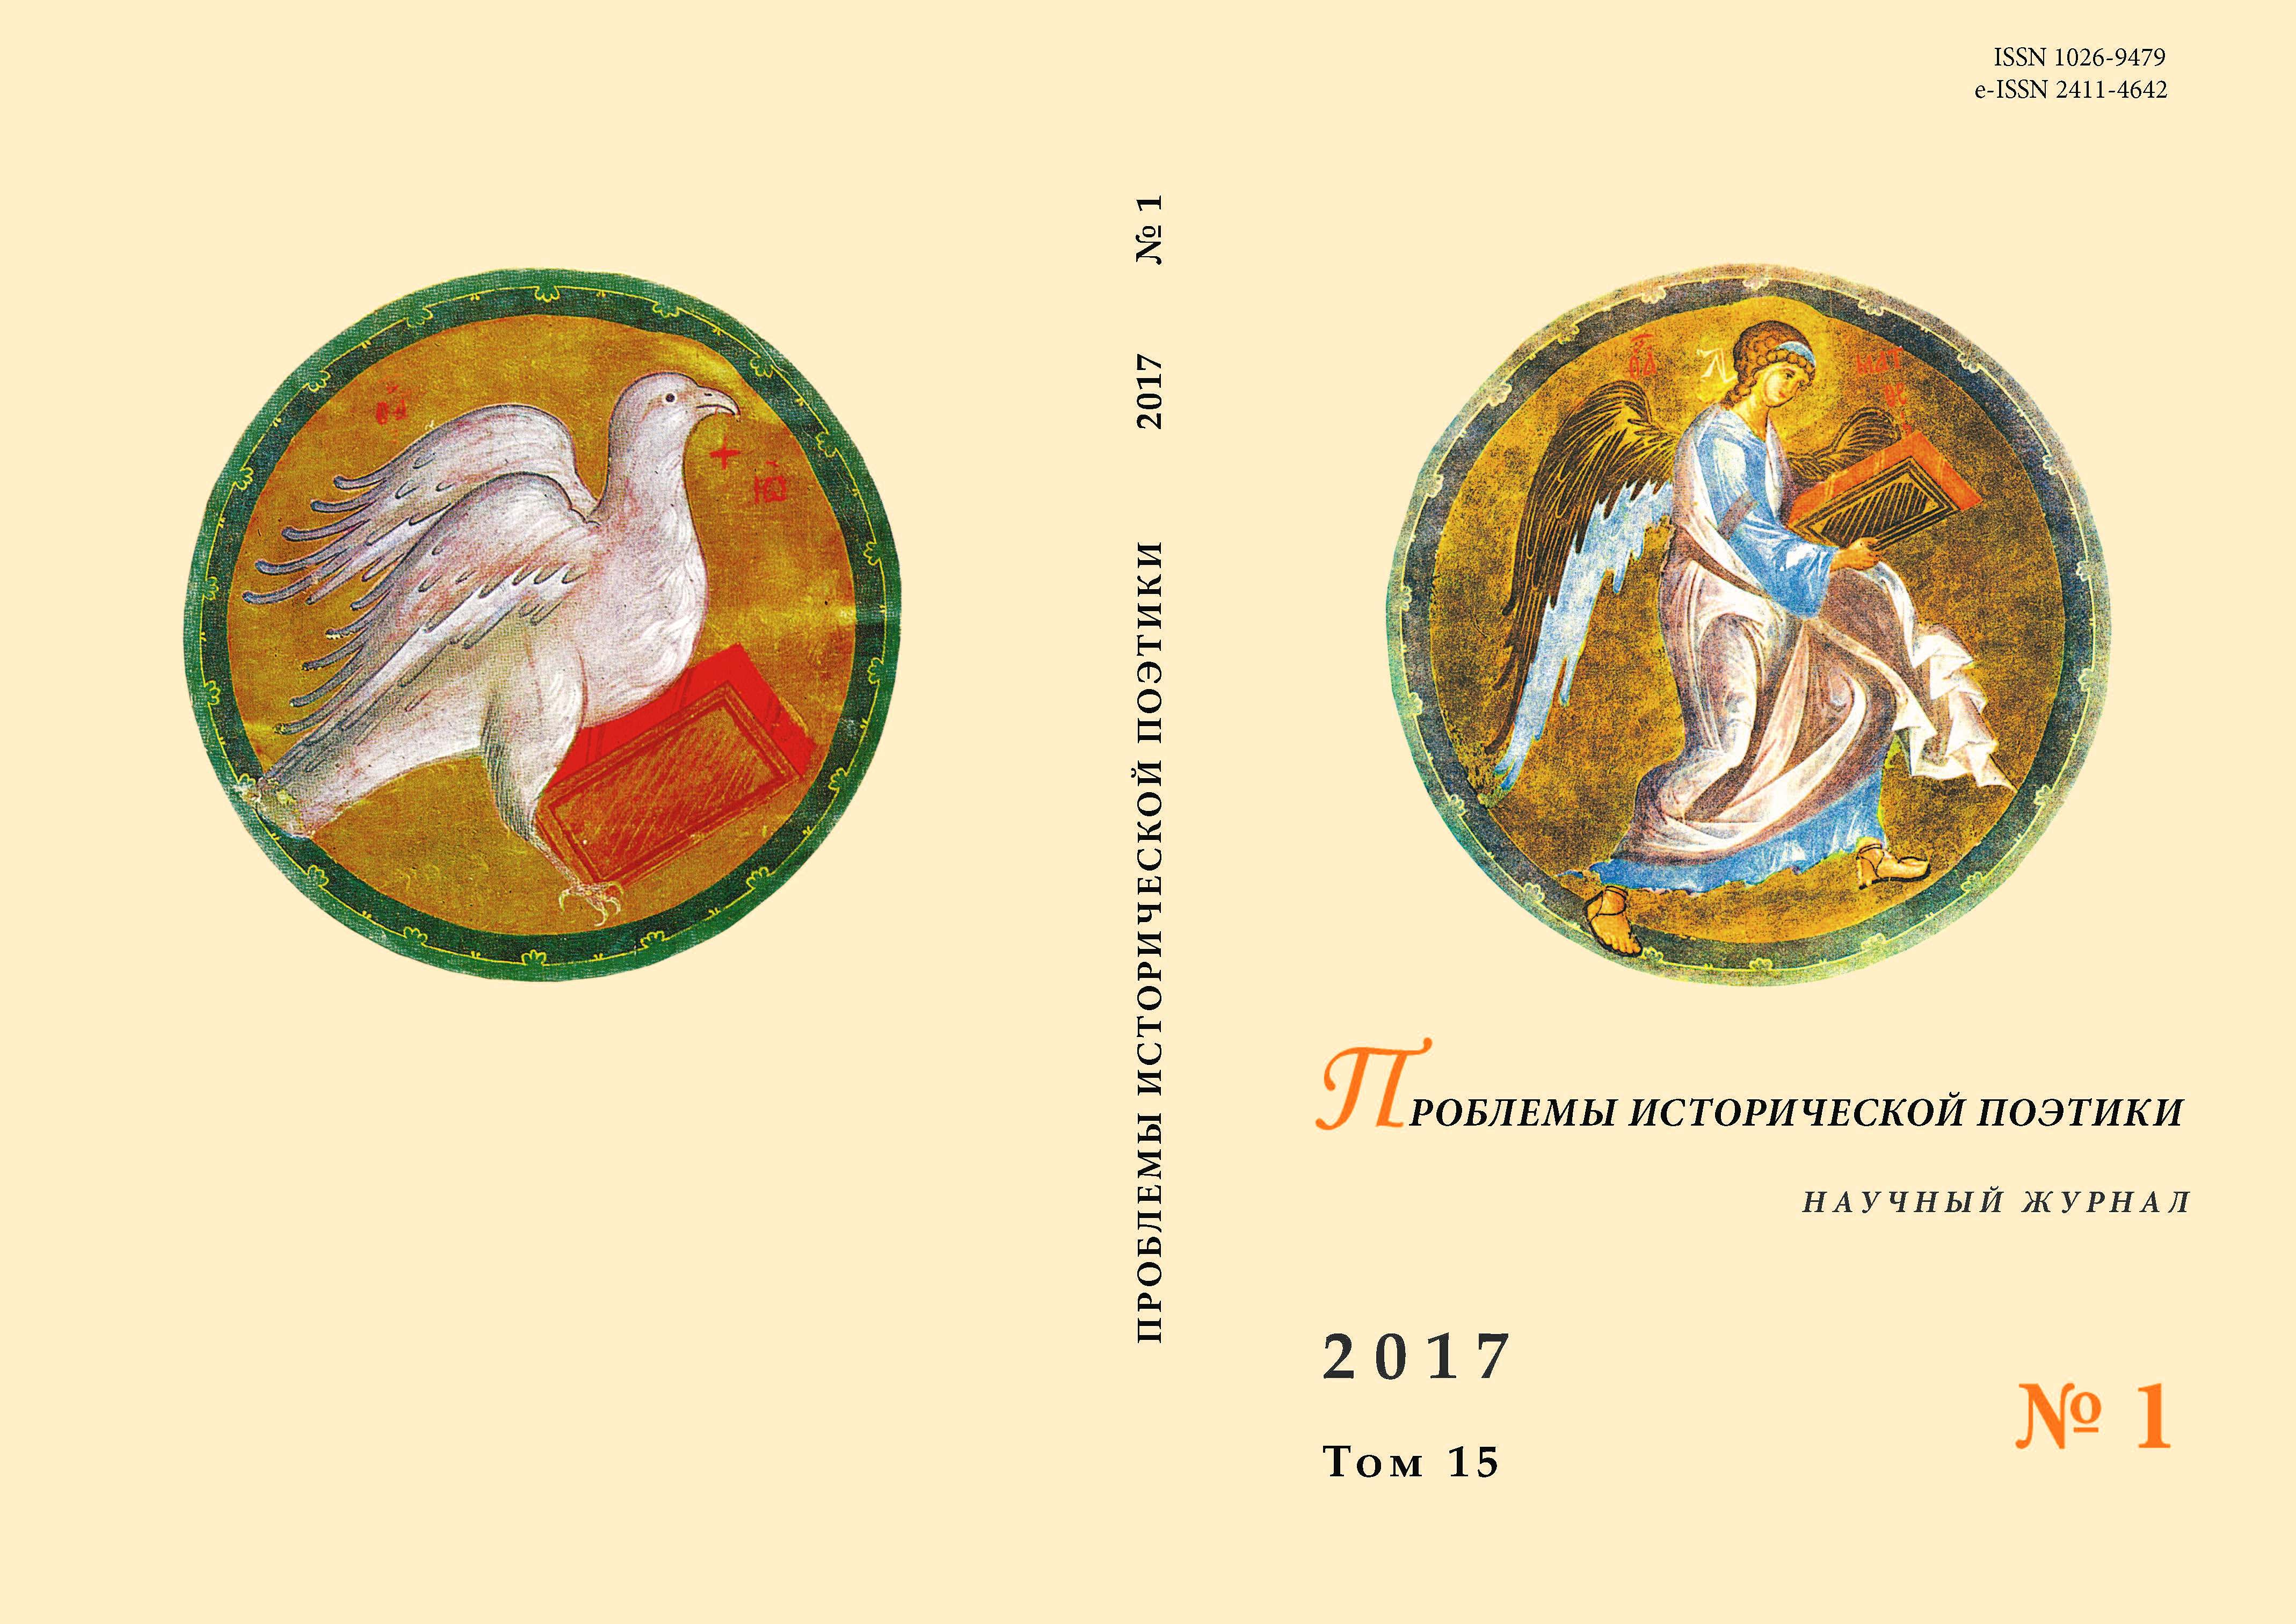 THE PROBLEM OF THE PLOT AND THE GENRE IN N. A. RADISHCHEV’S “CHURILA PLENKOVICH, BOGATYR SONGWRITING” Cover Image